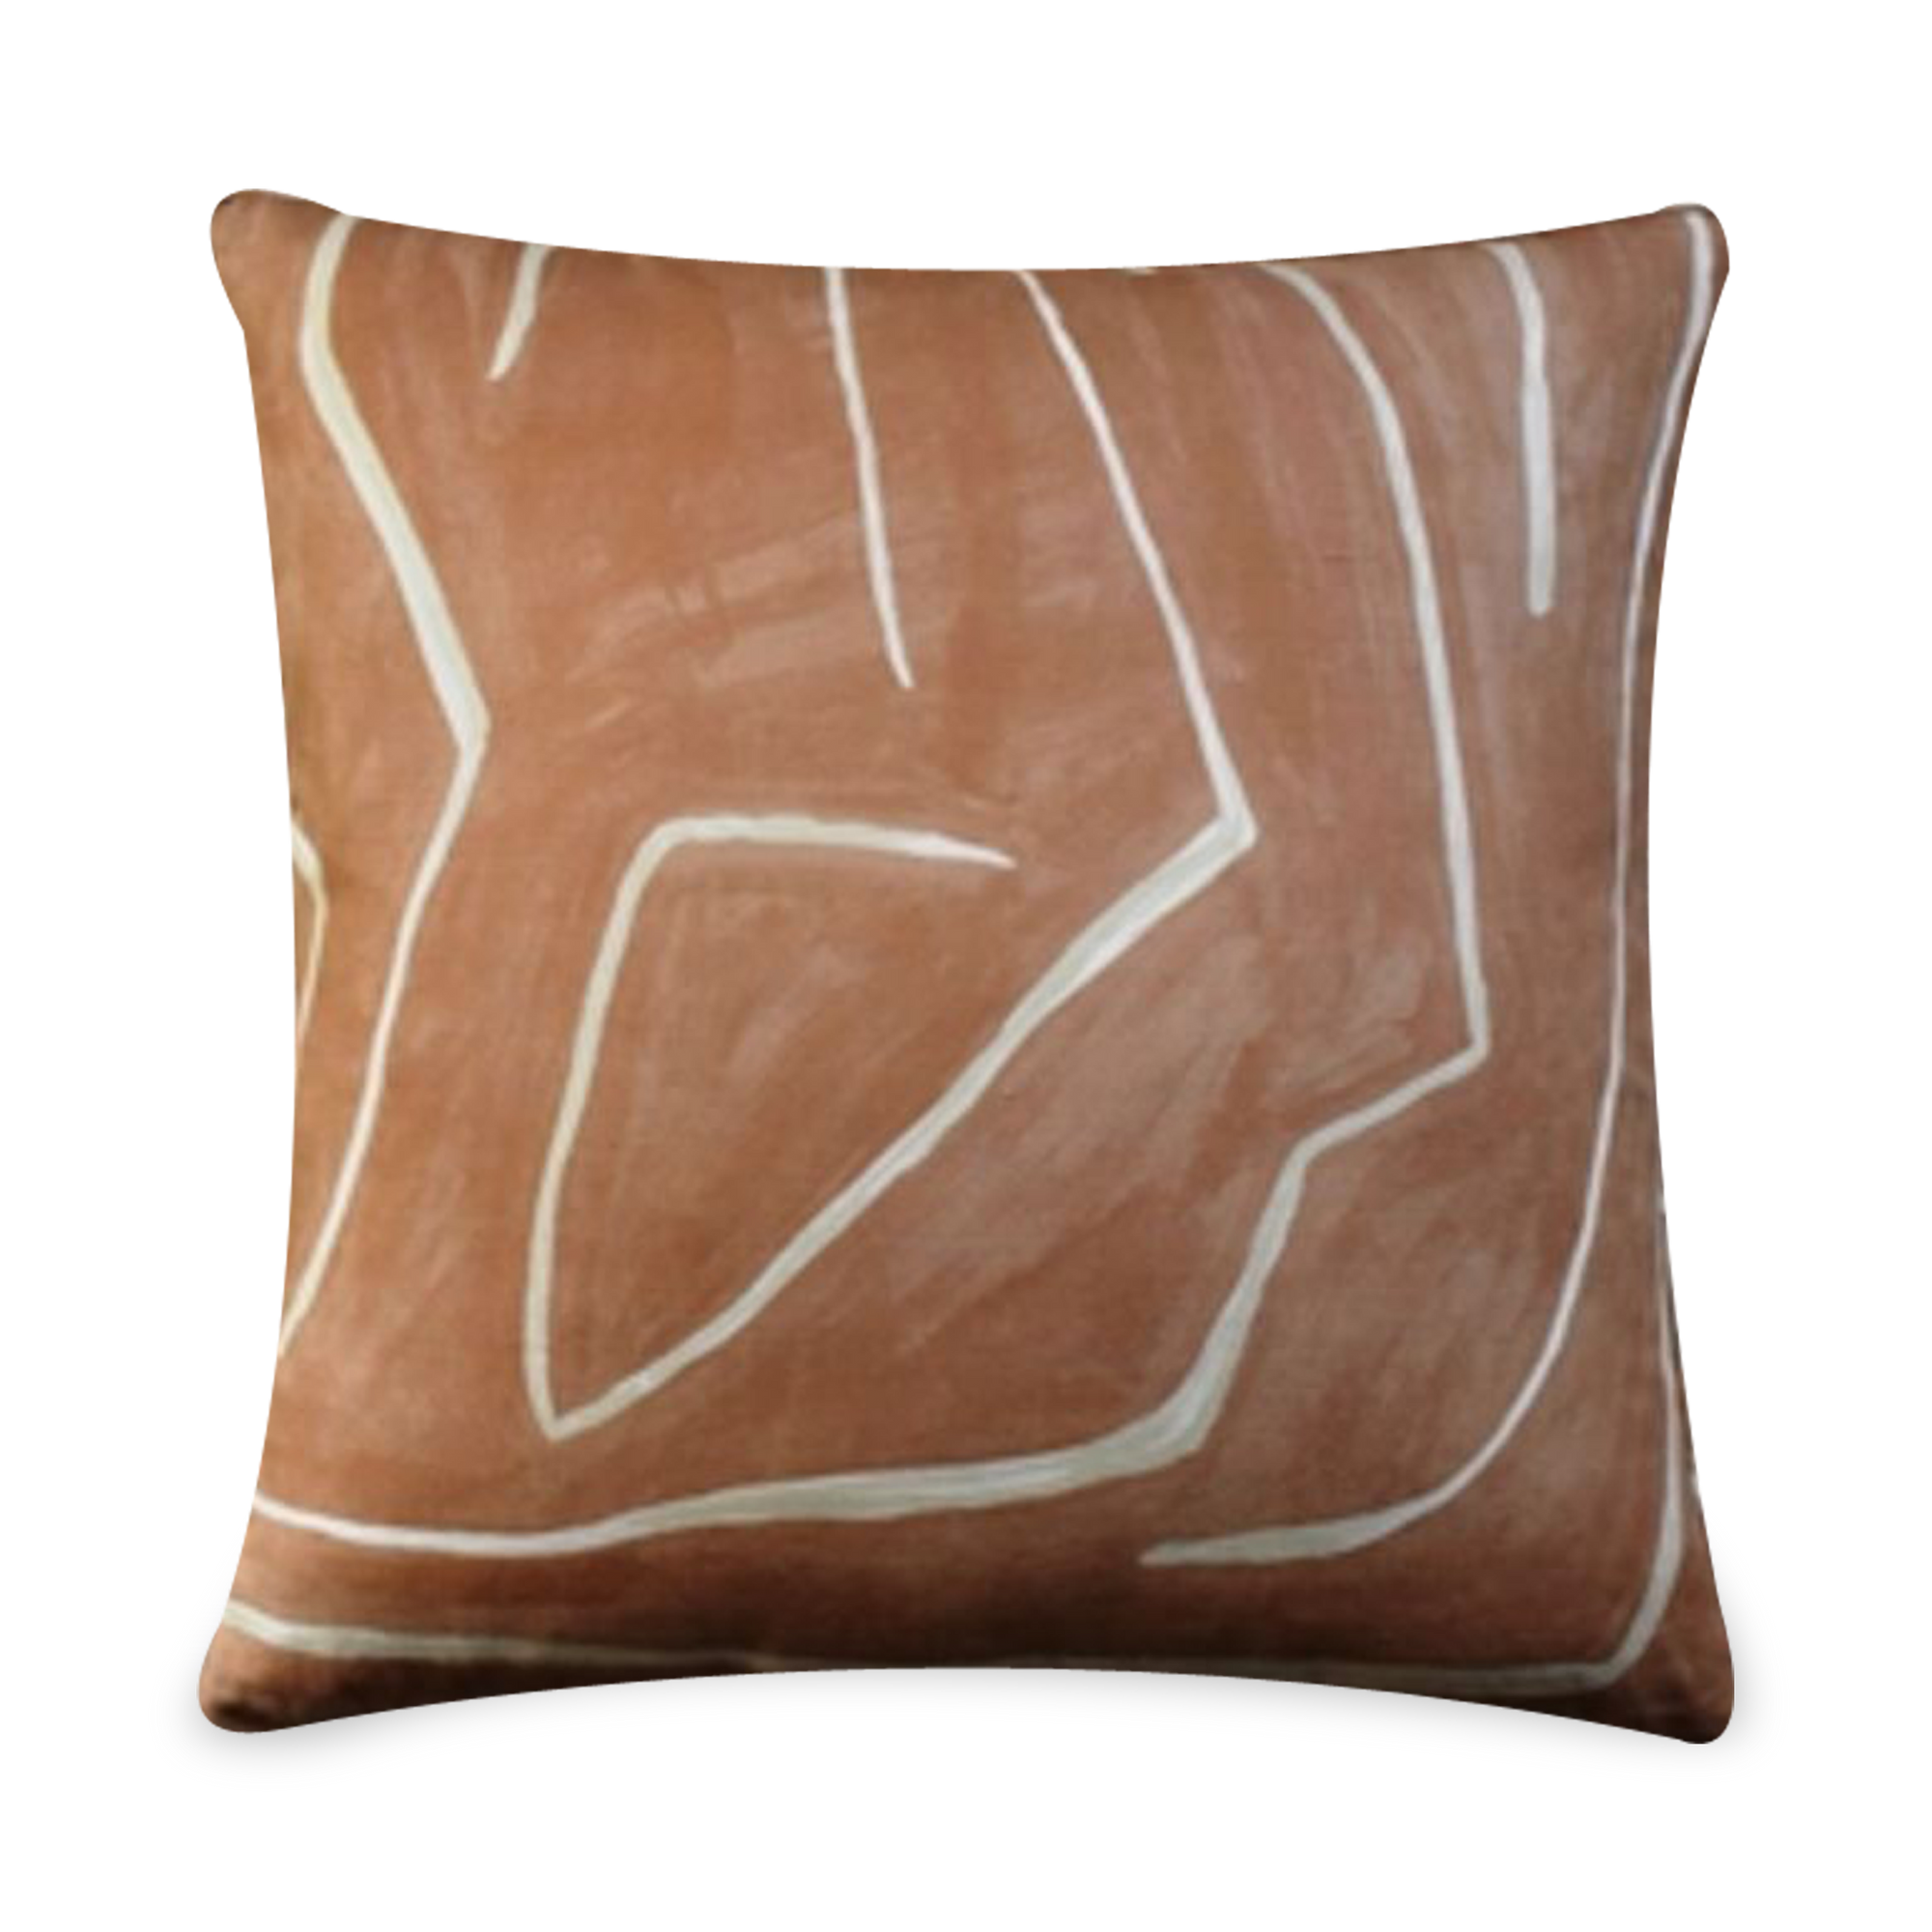 The Graffito Pillow features an abstract design and bold colour contrast.